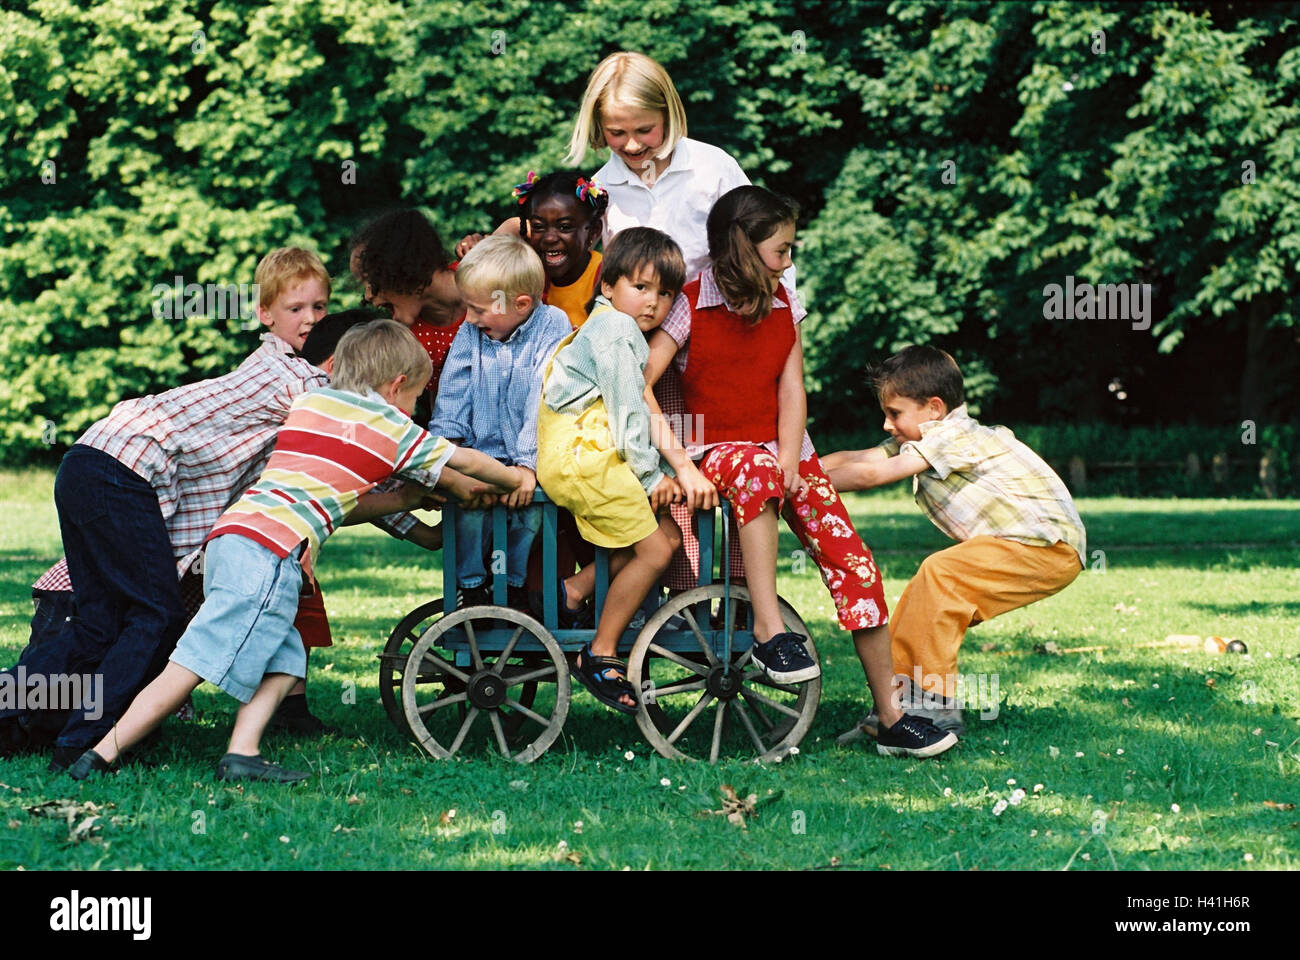 Children, group, skin colour differently, handcarts, push, game, fun, summer, outside youth, childhood, friends, friendship, boy, girl, nationality, passed away, difference, leisure time, amusement, happy, melted, lighthearted, carriages, conductor carria Stock Photo